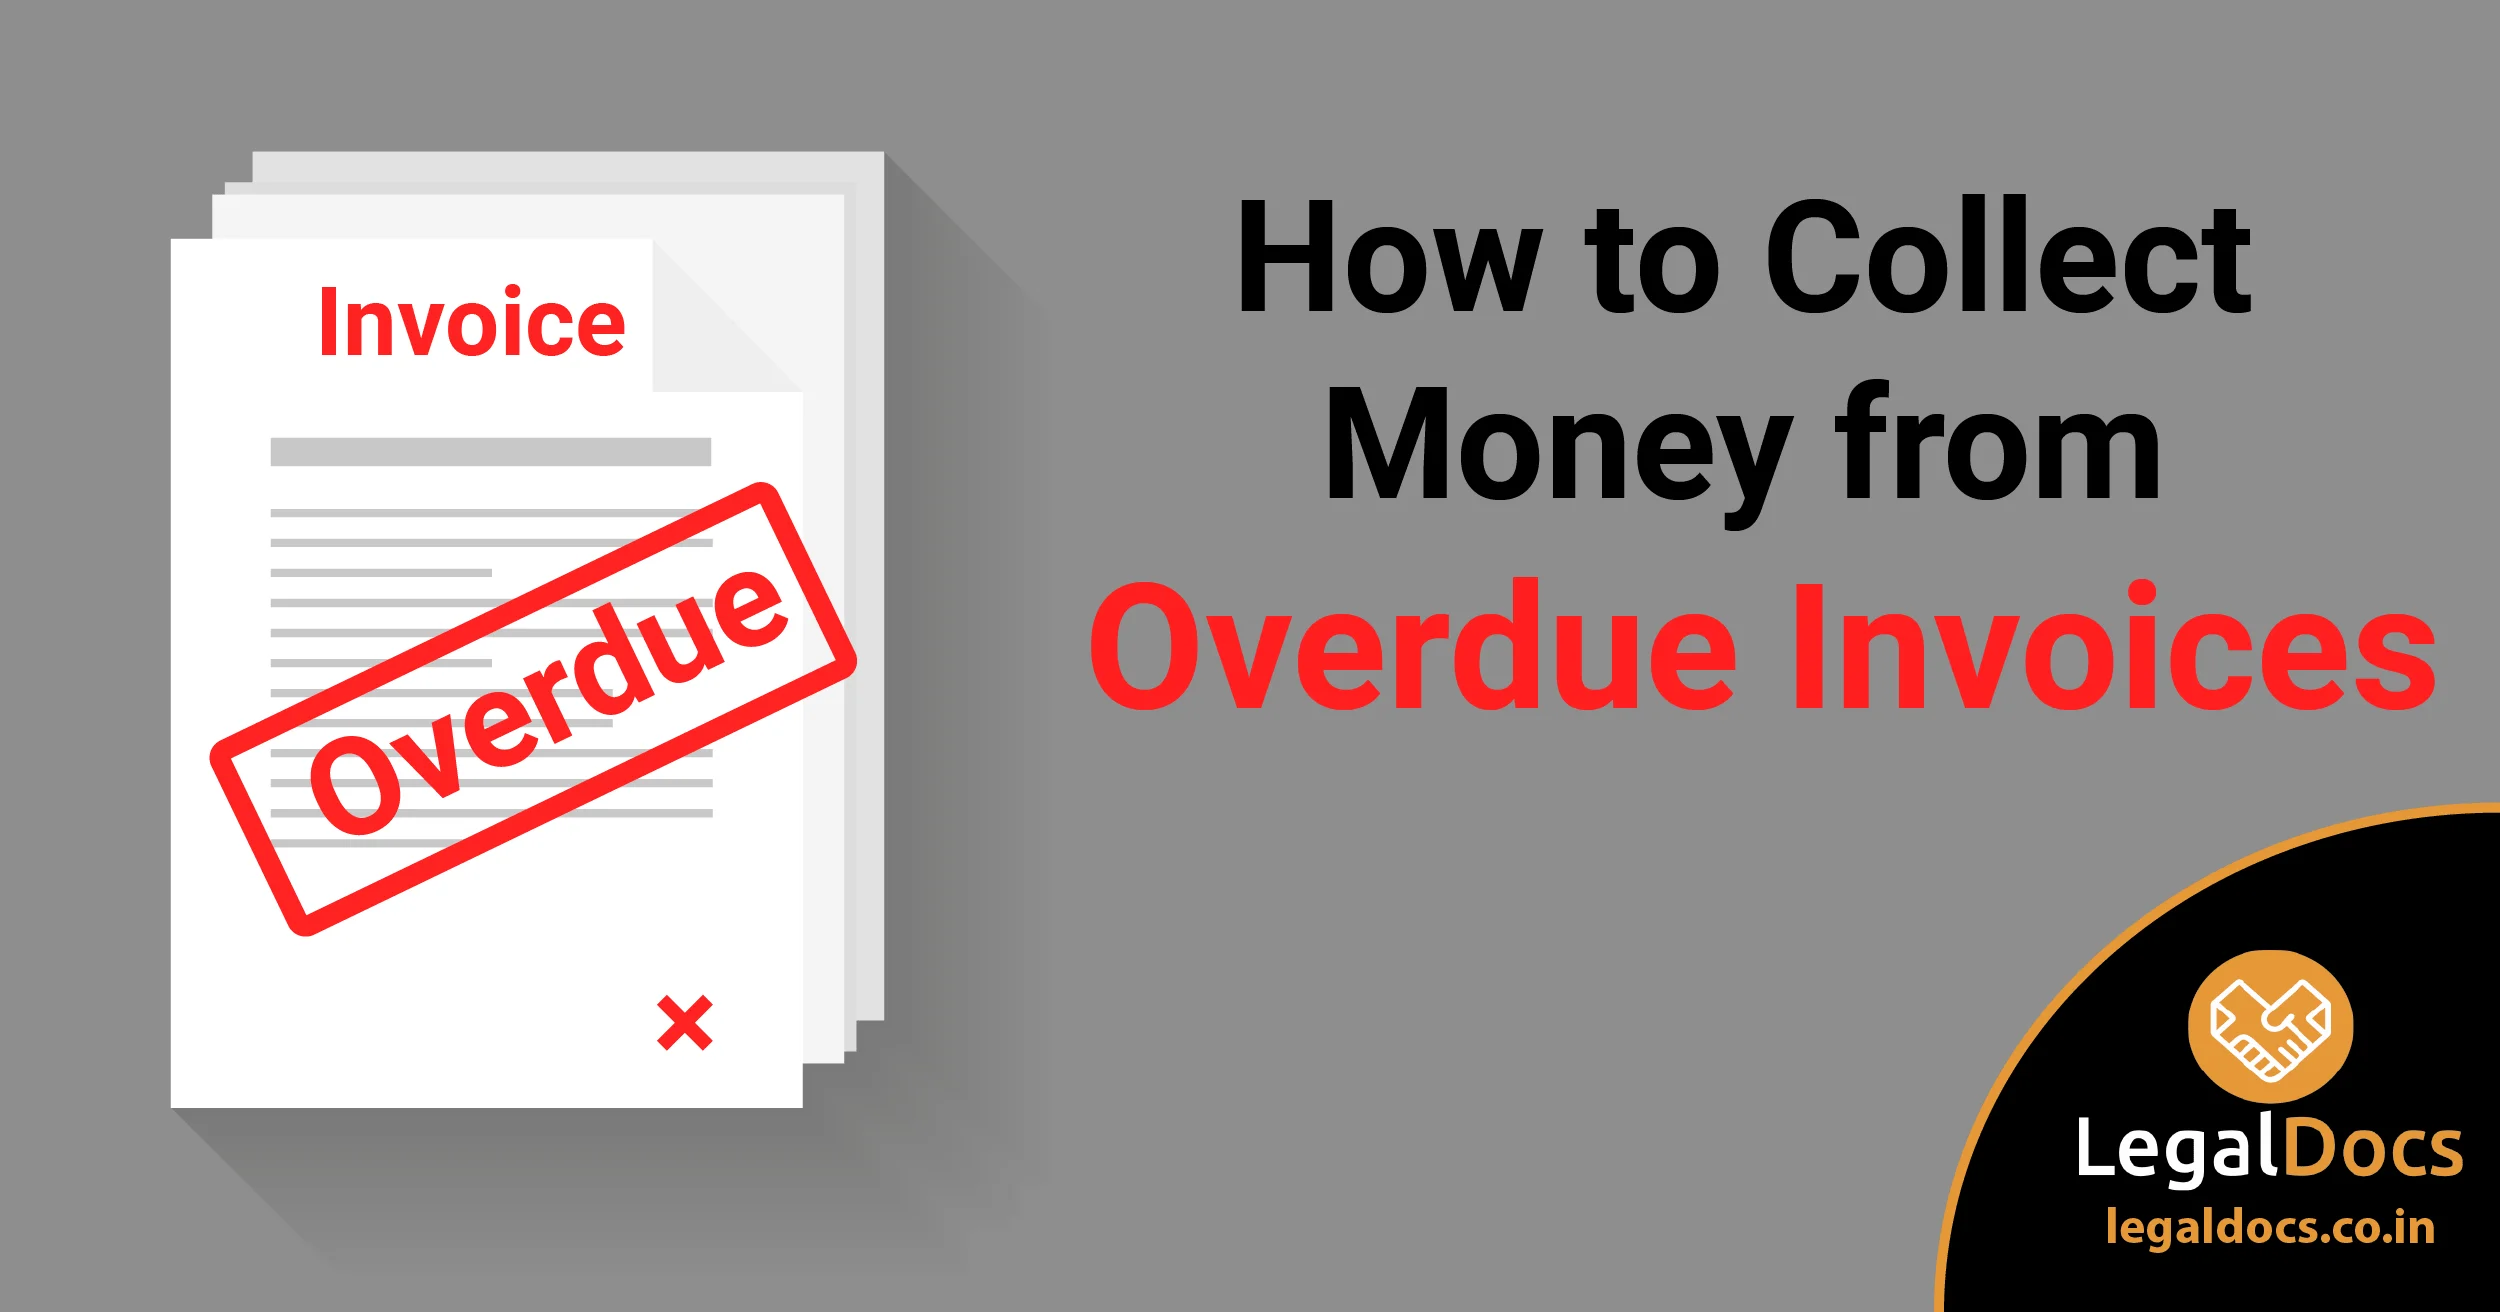 How to Collect Money from Overdue Invoices